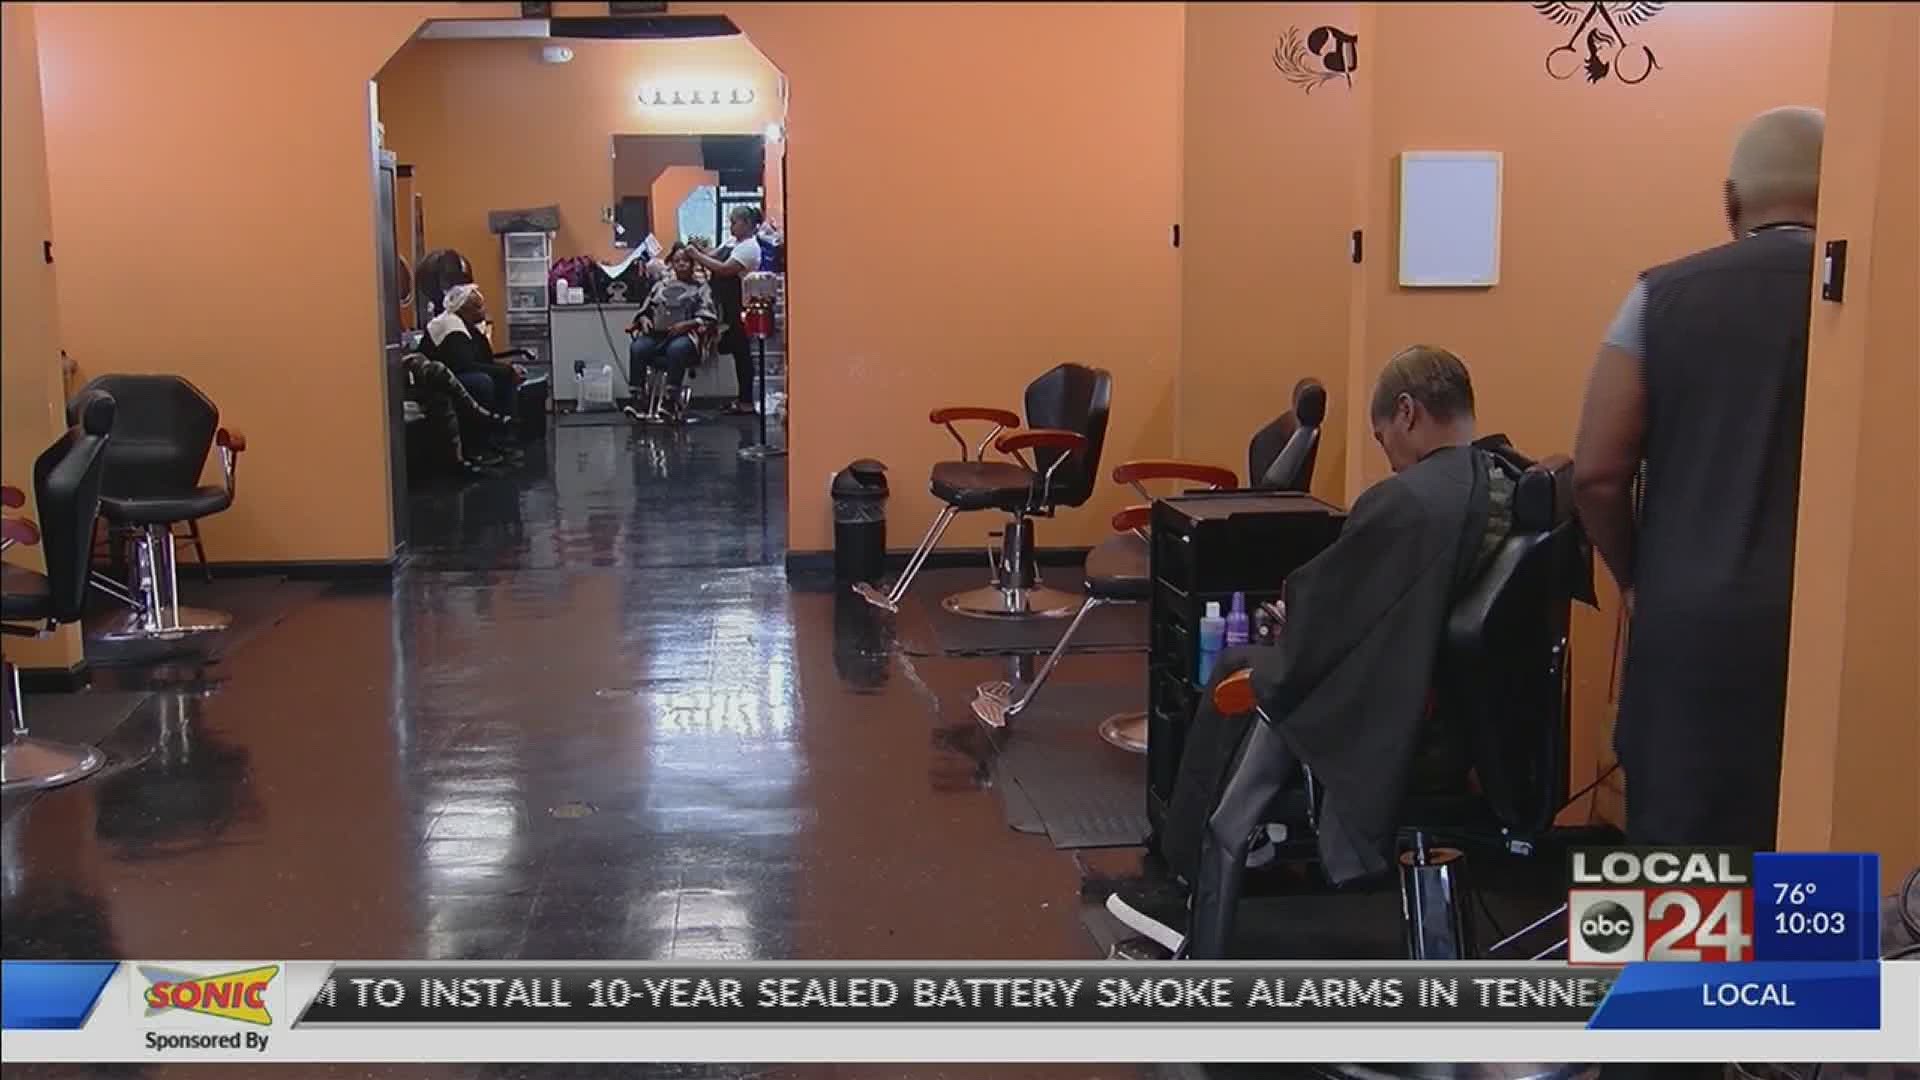 Hair and nail salons, gyms, and tattoo studios say they've been practicing state and industry health standards well before COVID-19 came along